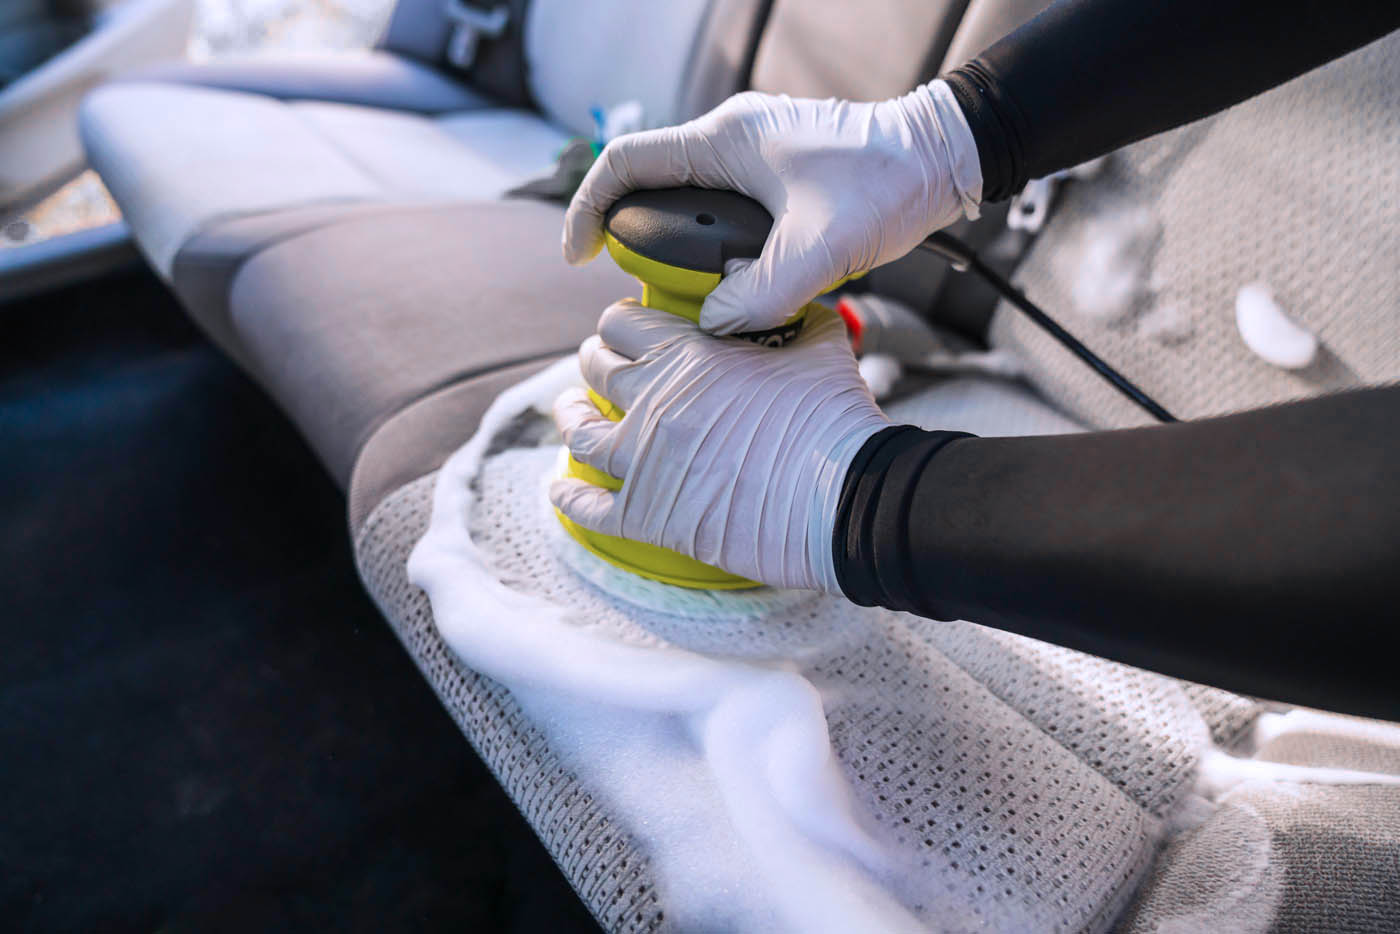 Professional at Dapper Pros doing interior car detailing, giving seats a deep cleaning.